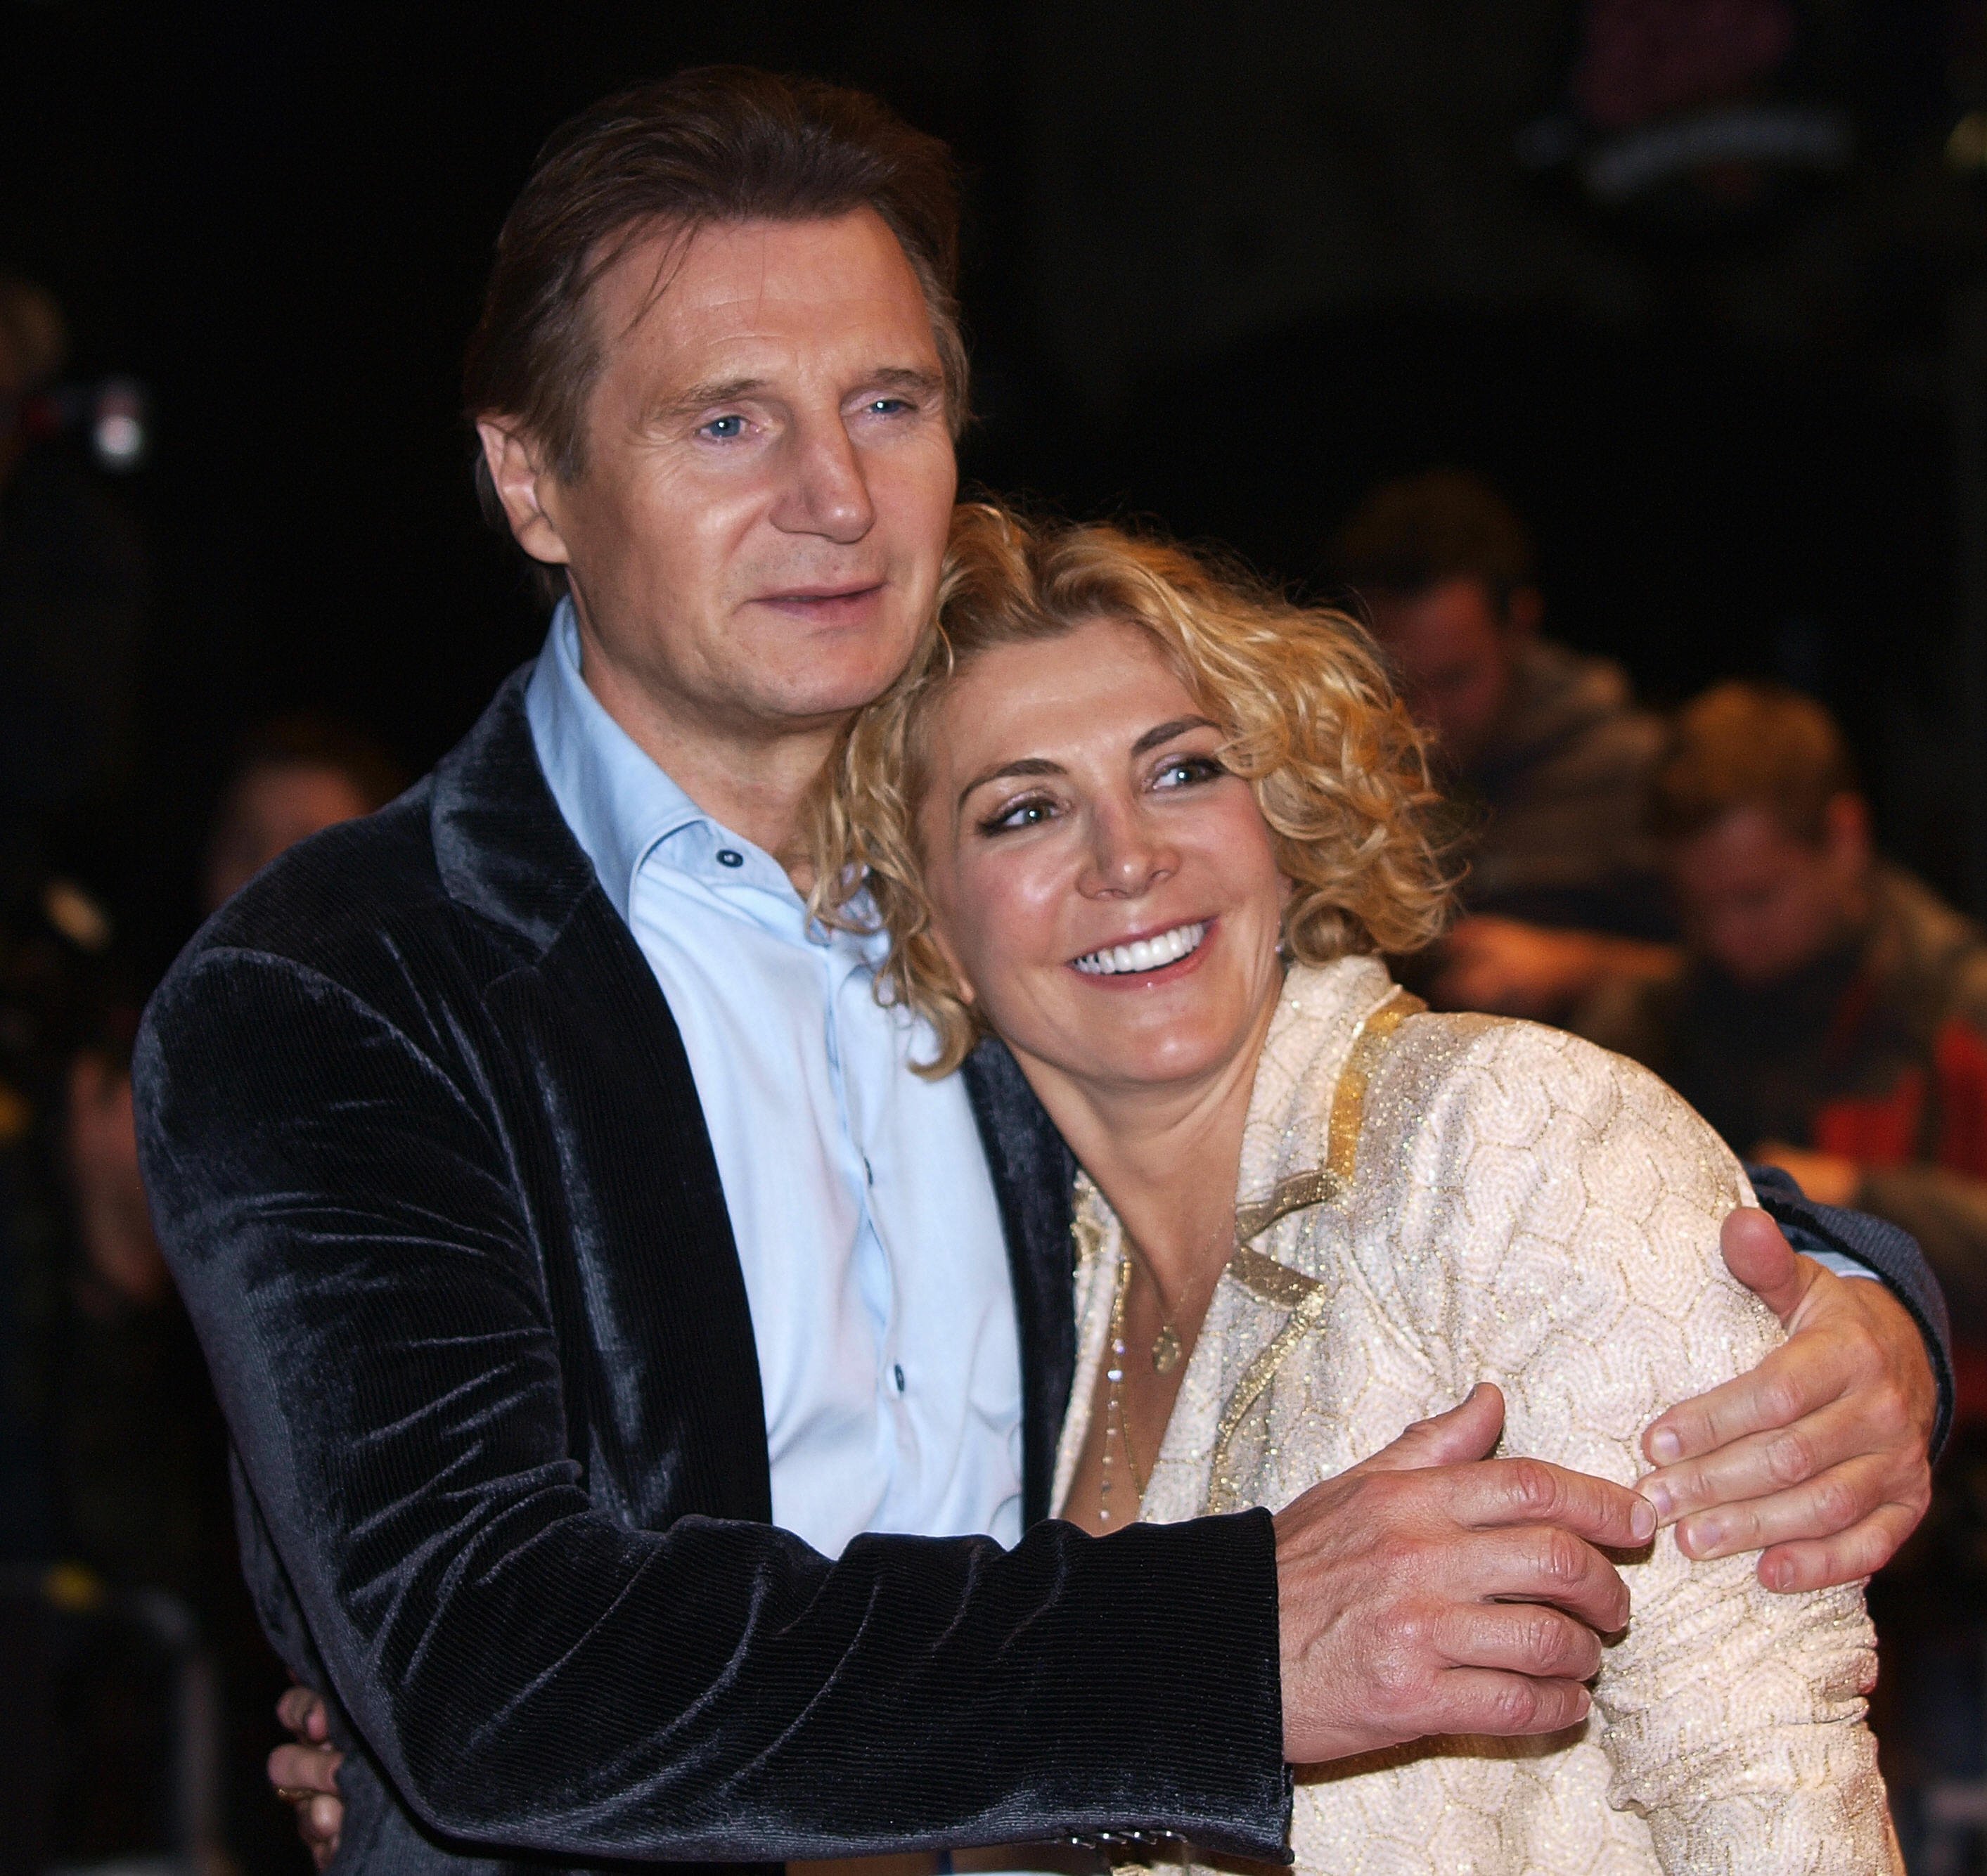 Liam Neeson with his actress wife Natasha Richardson during the British premiere of his film, "The Other Man", in Leicester Square, London. / Source: Getty Images